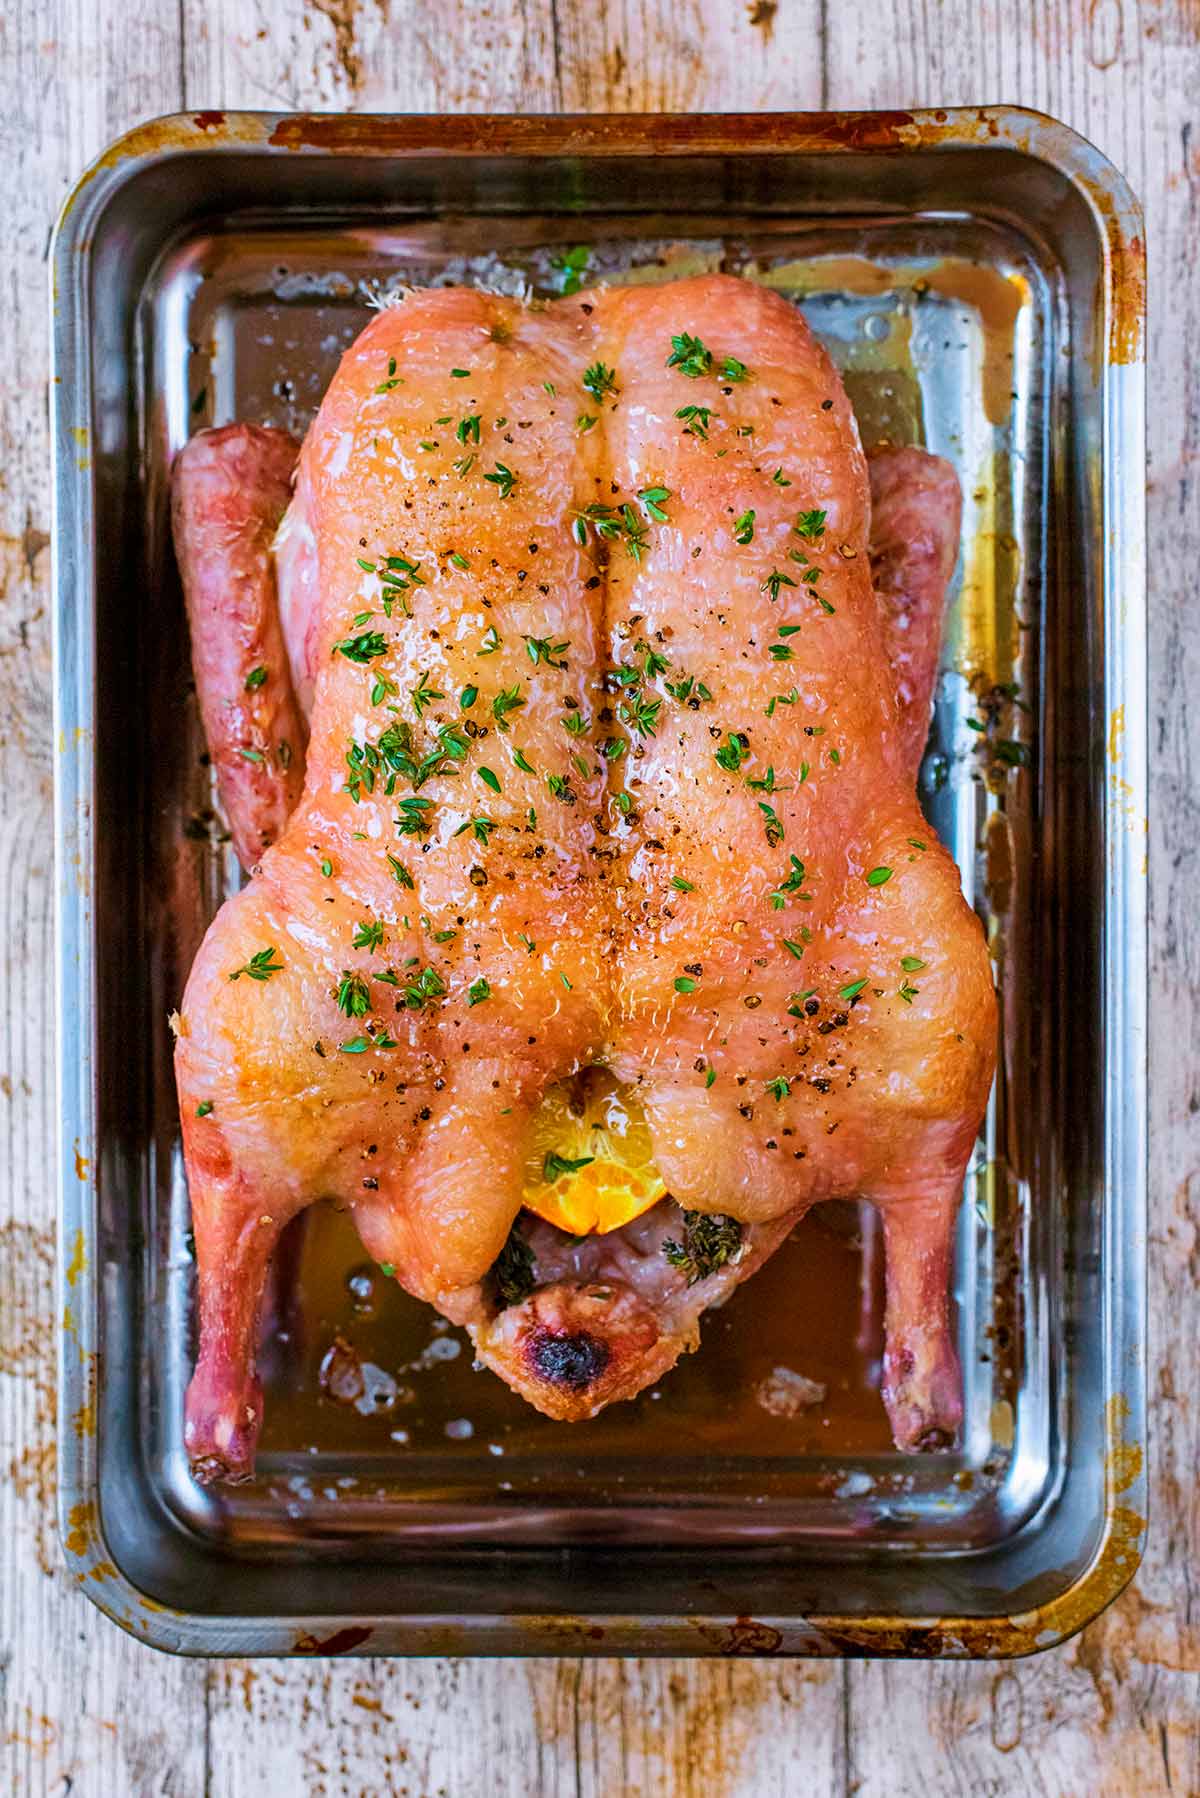 A whole partially cooked duck in a roasting pan with honey and thyme leaves on top.